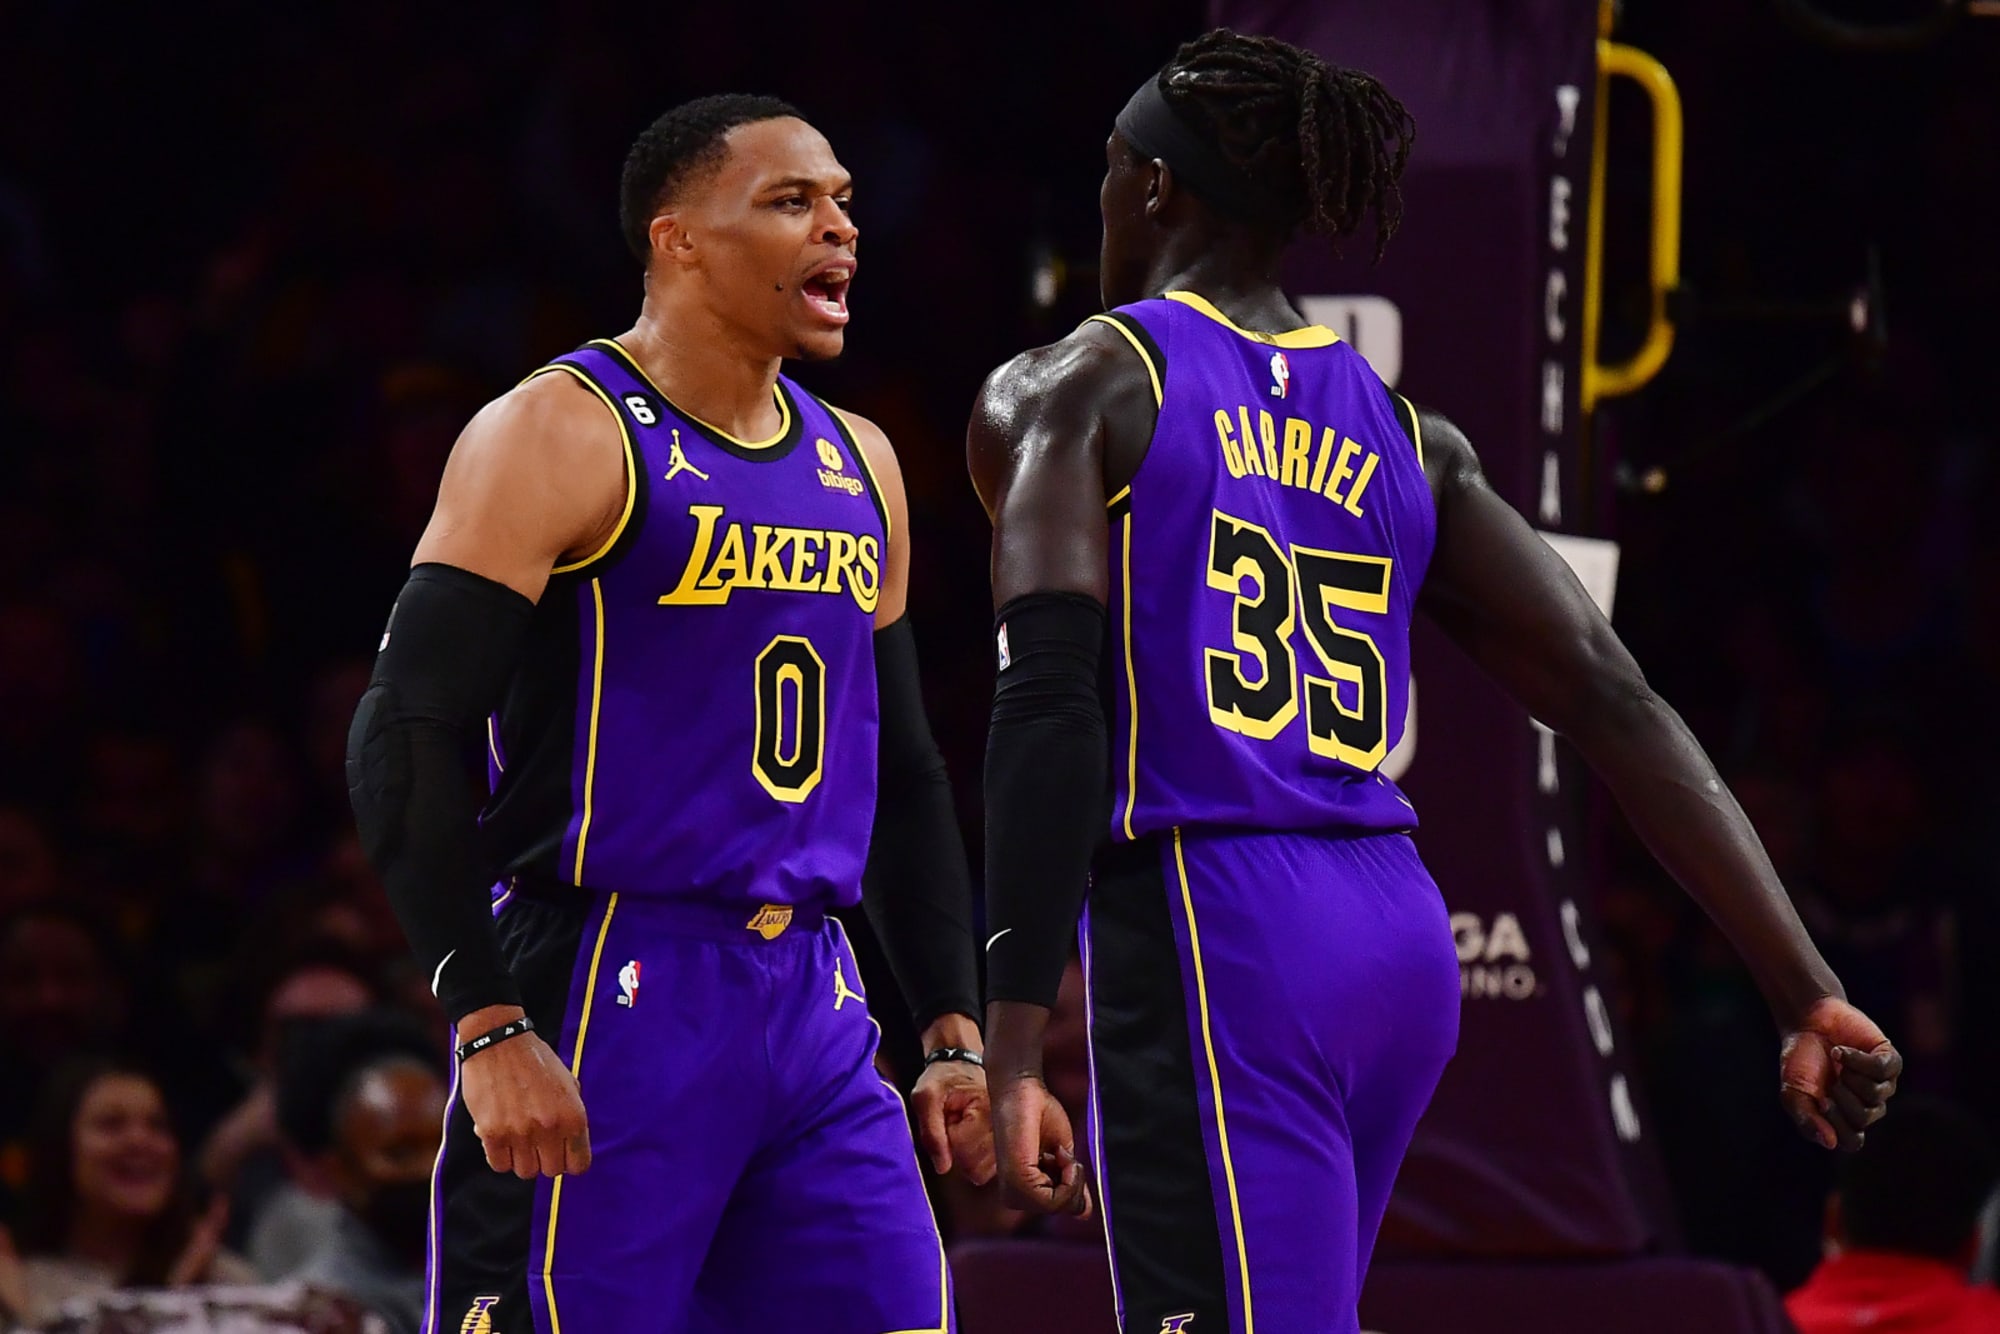 Lakers find a much smoother offense without LeBron James in Pistons win